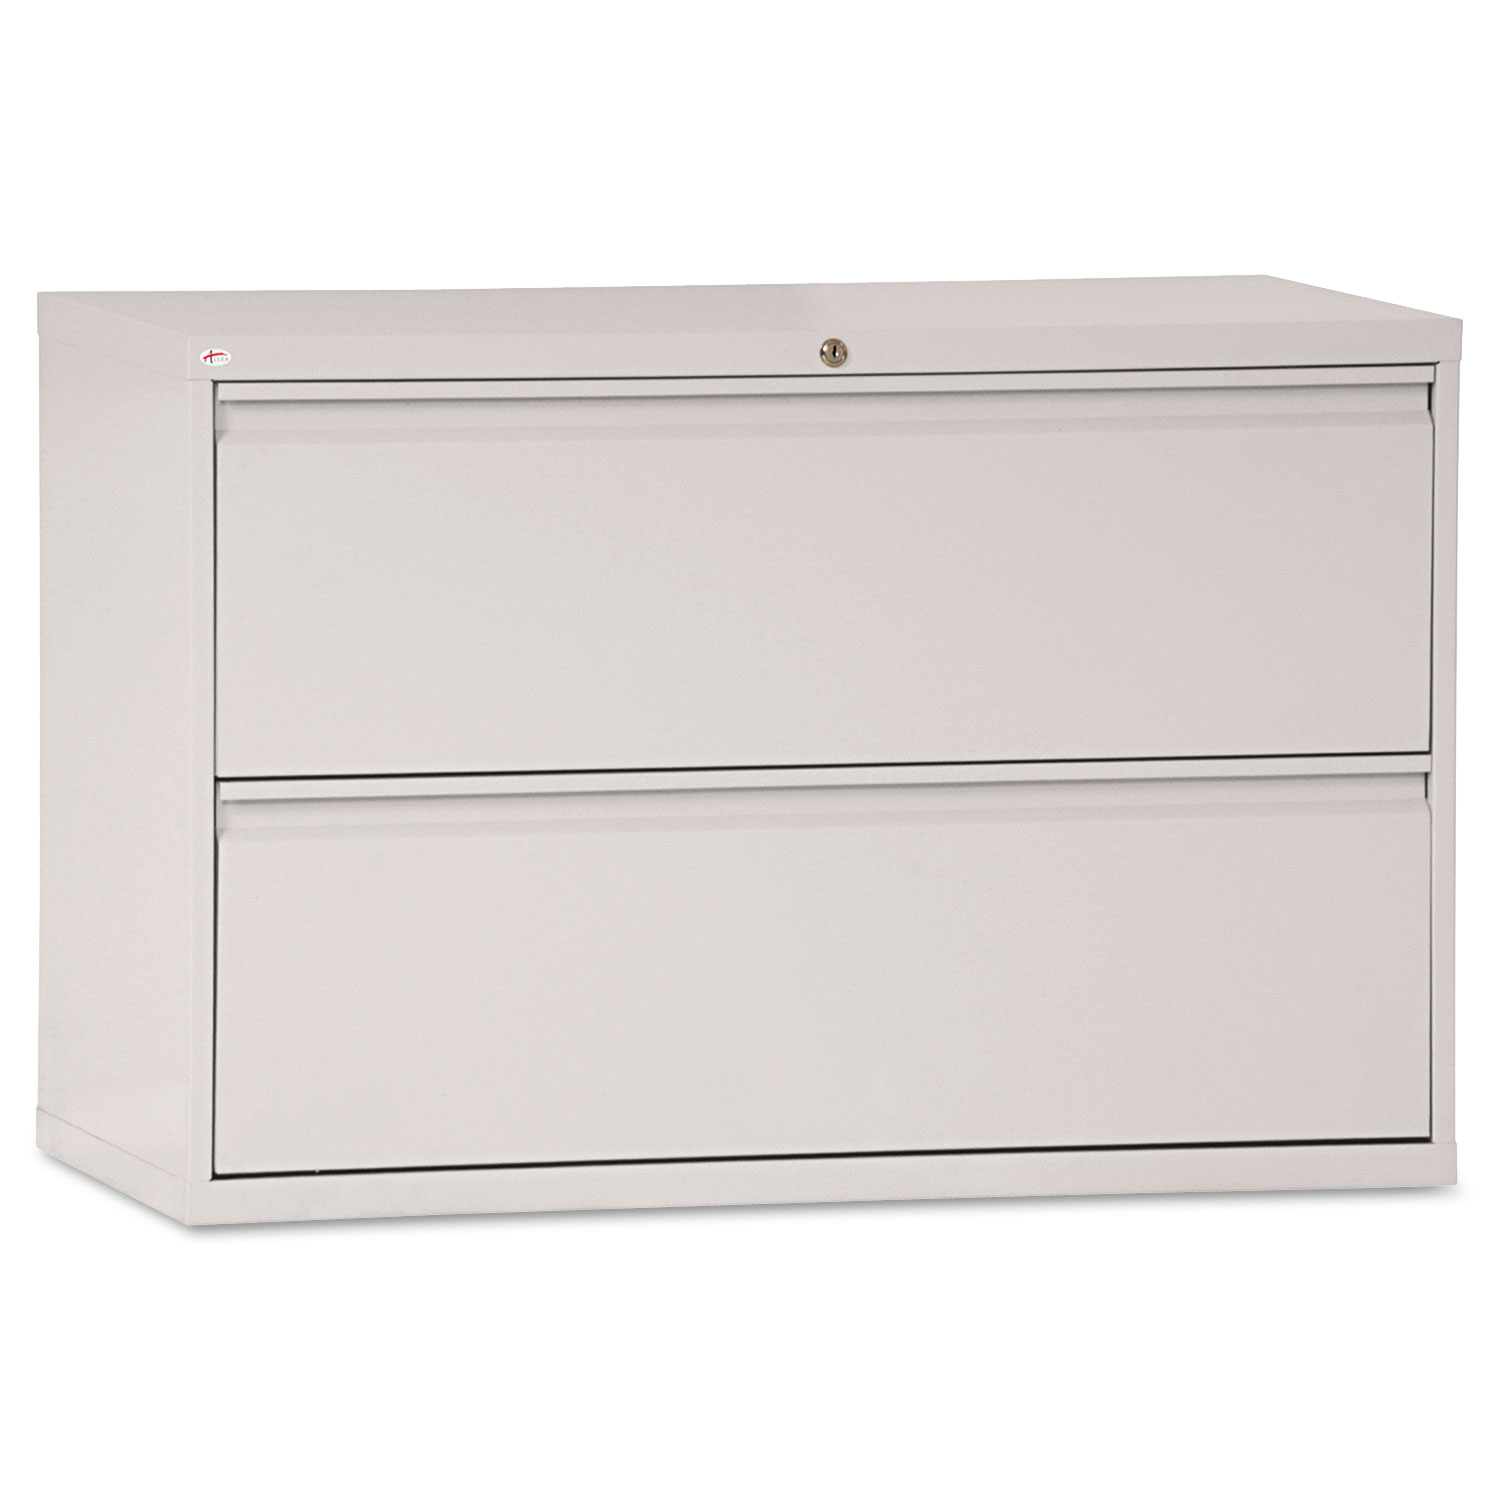  Alera ALELF4229LG Two-Drawer Lateral File Cabinet, 42w x 18d x 28h, Light Gray (ALELF4229LG) 